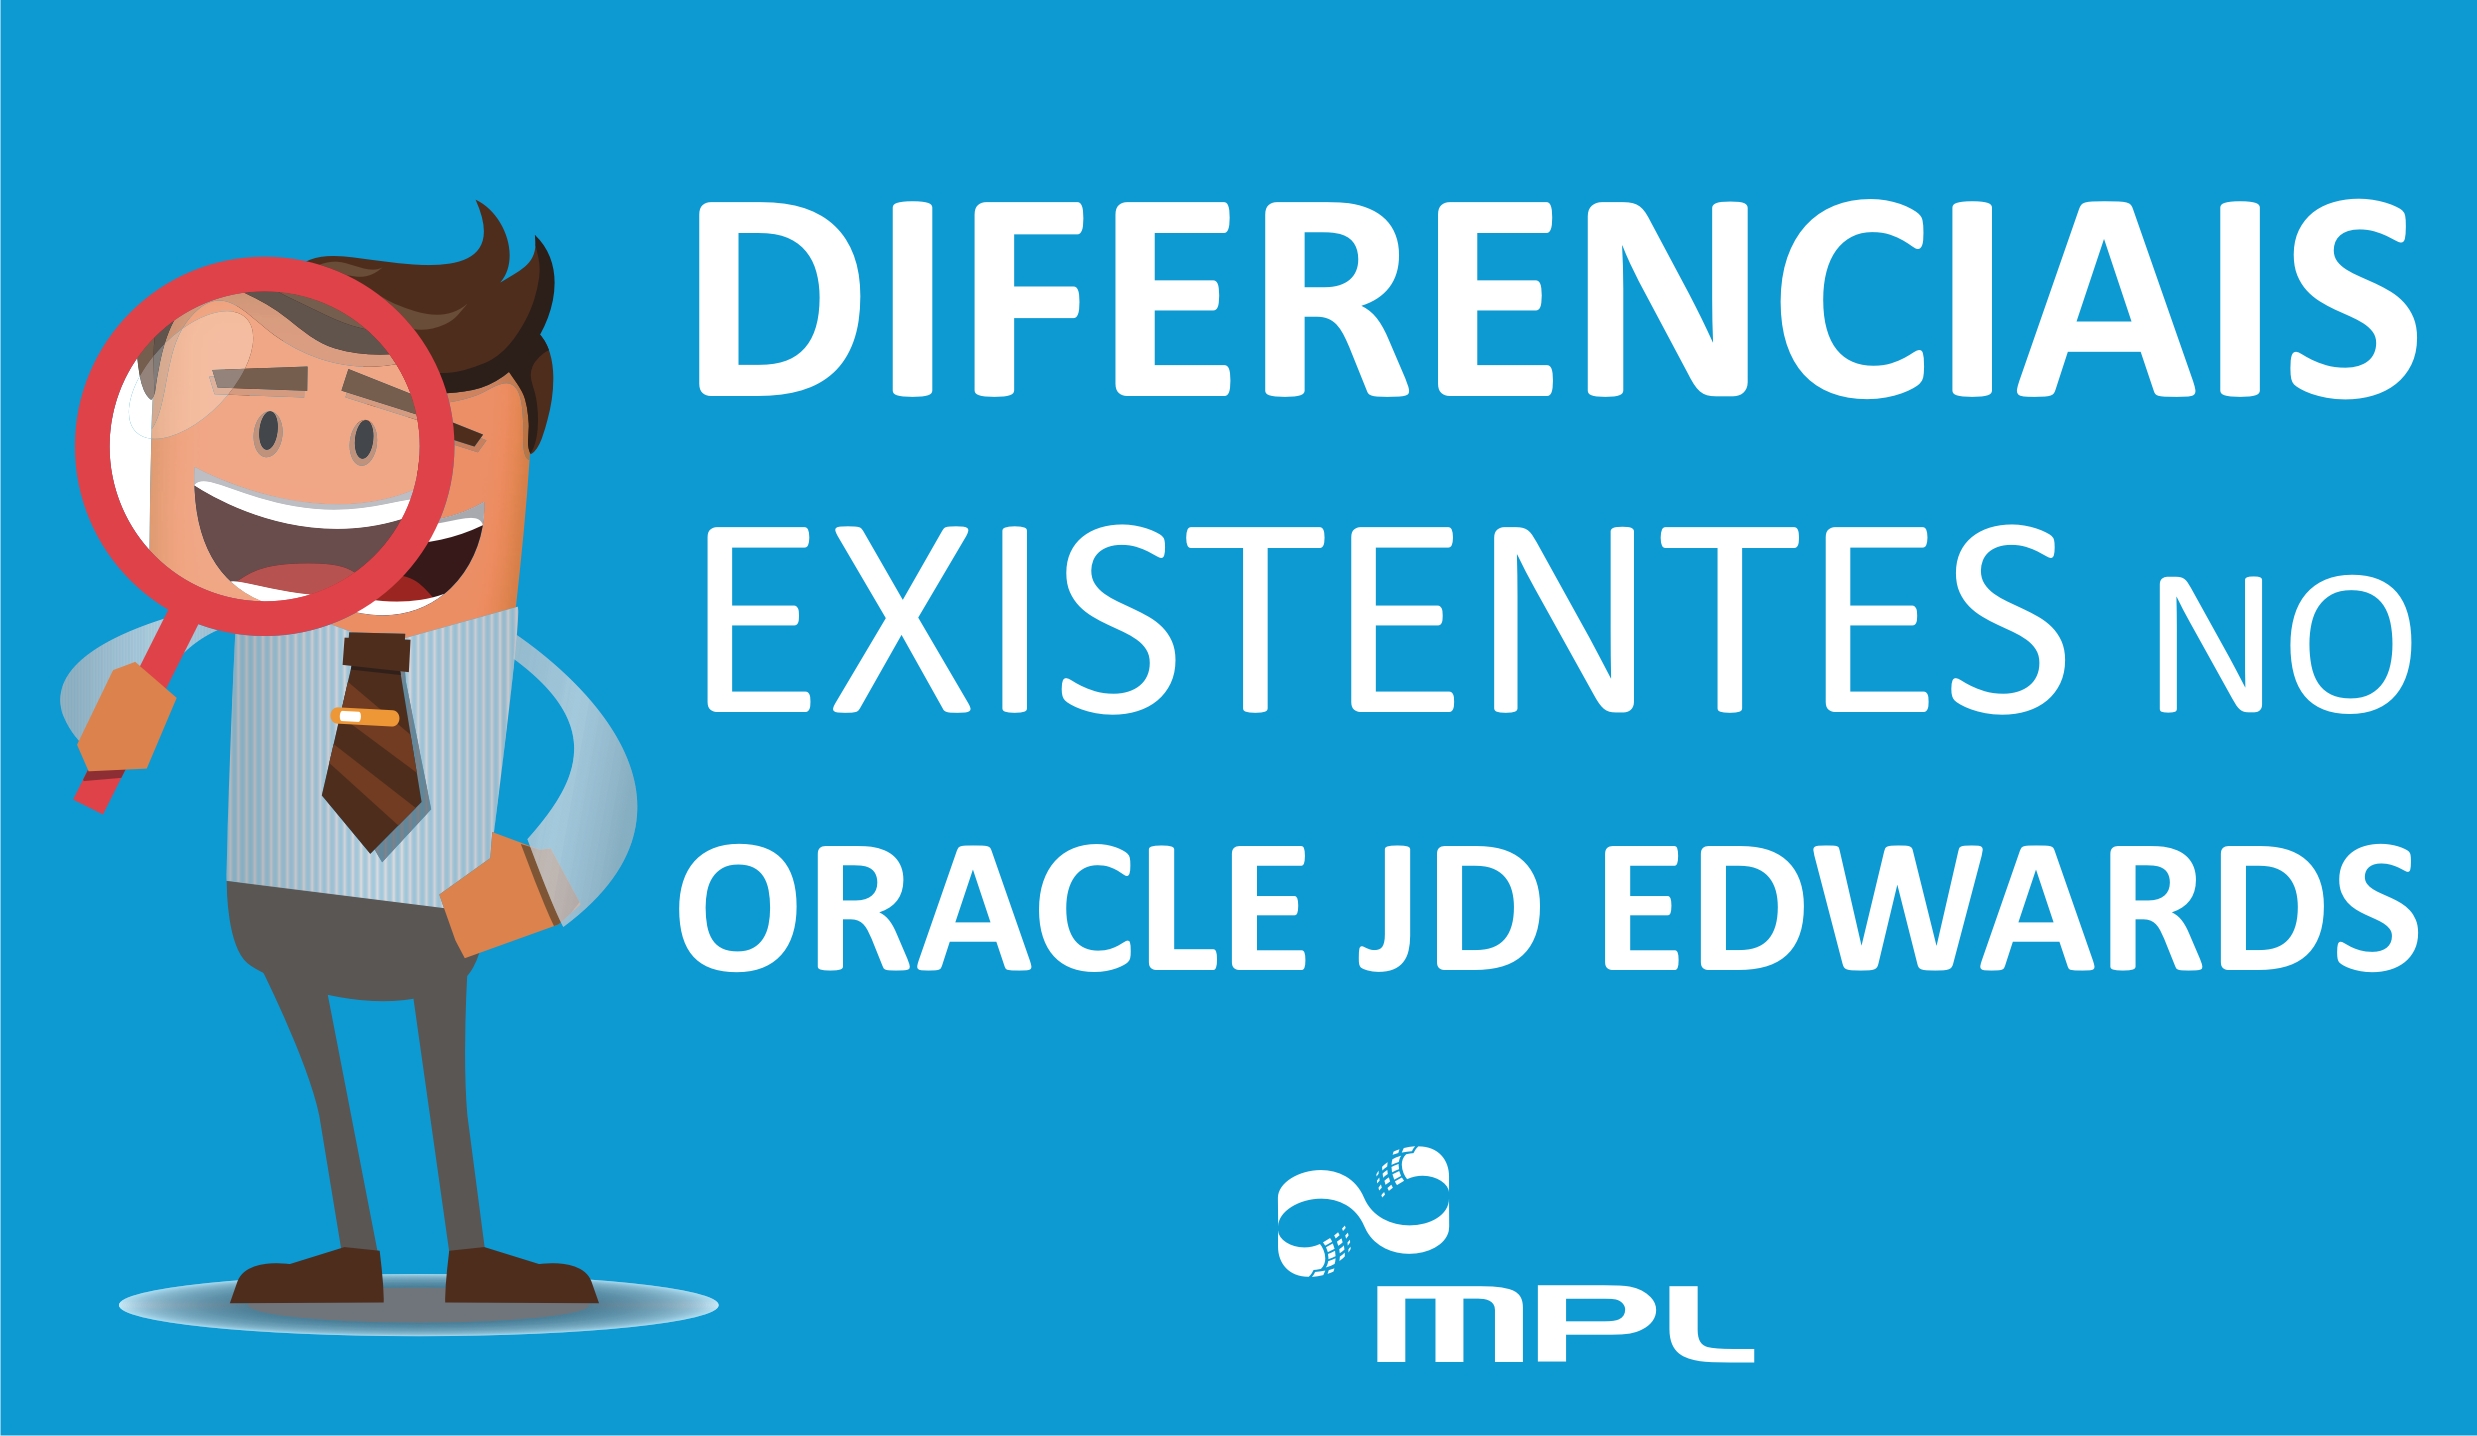 diferenciais oracle jd edwards